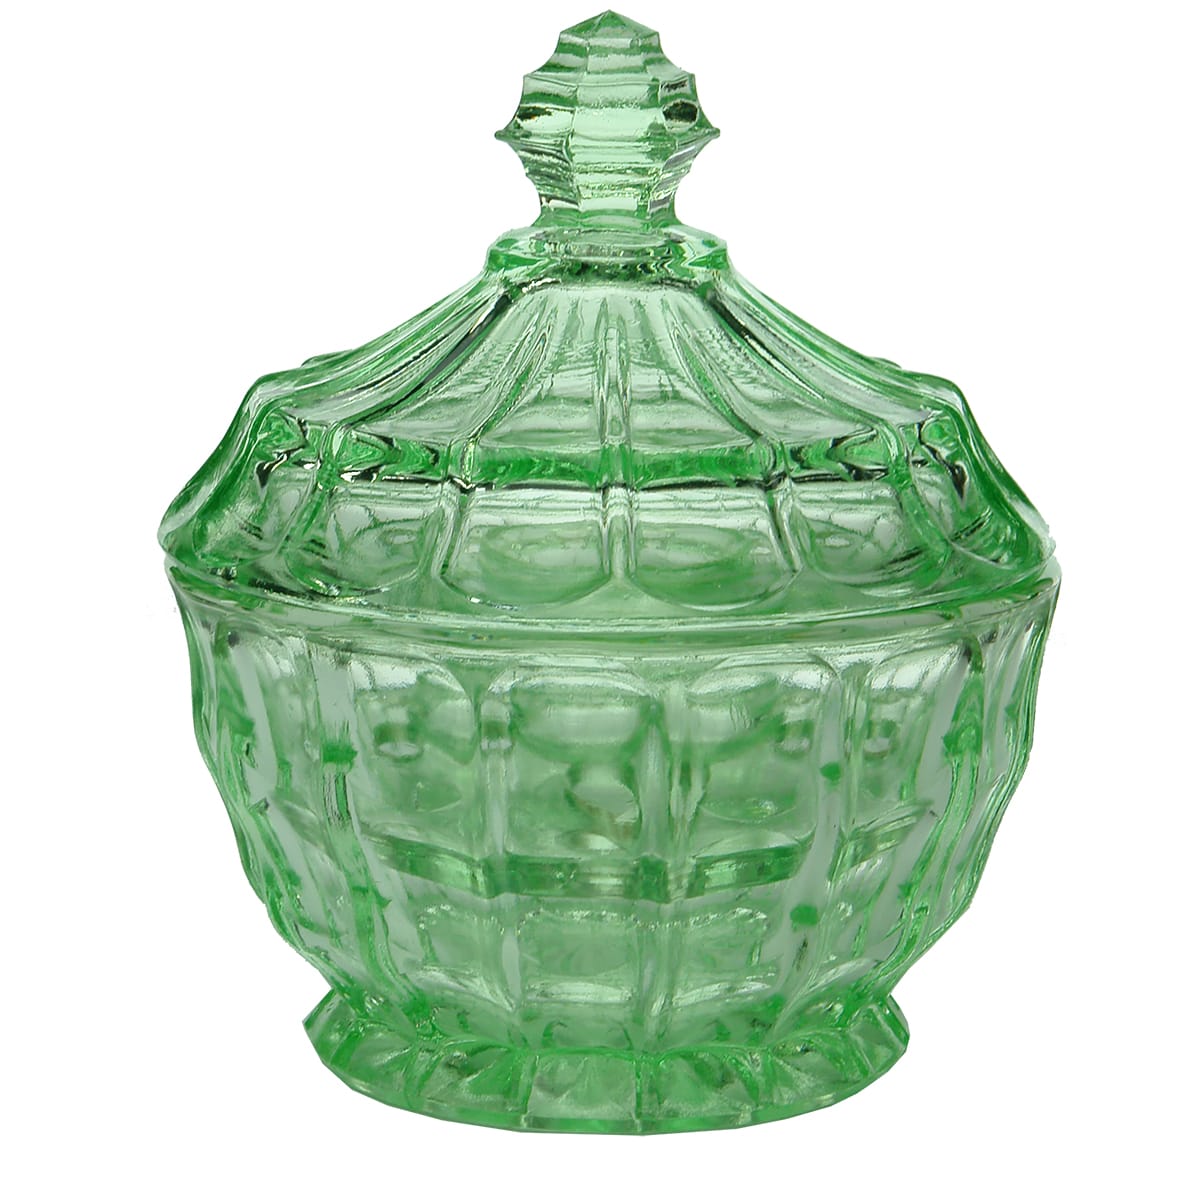 Glassware. Round green lidded depression glass bowl with frog.